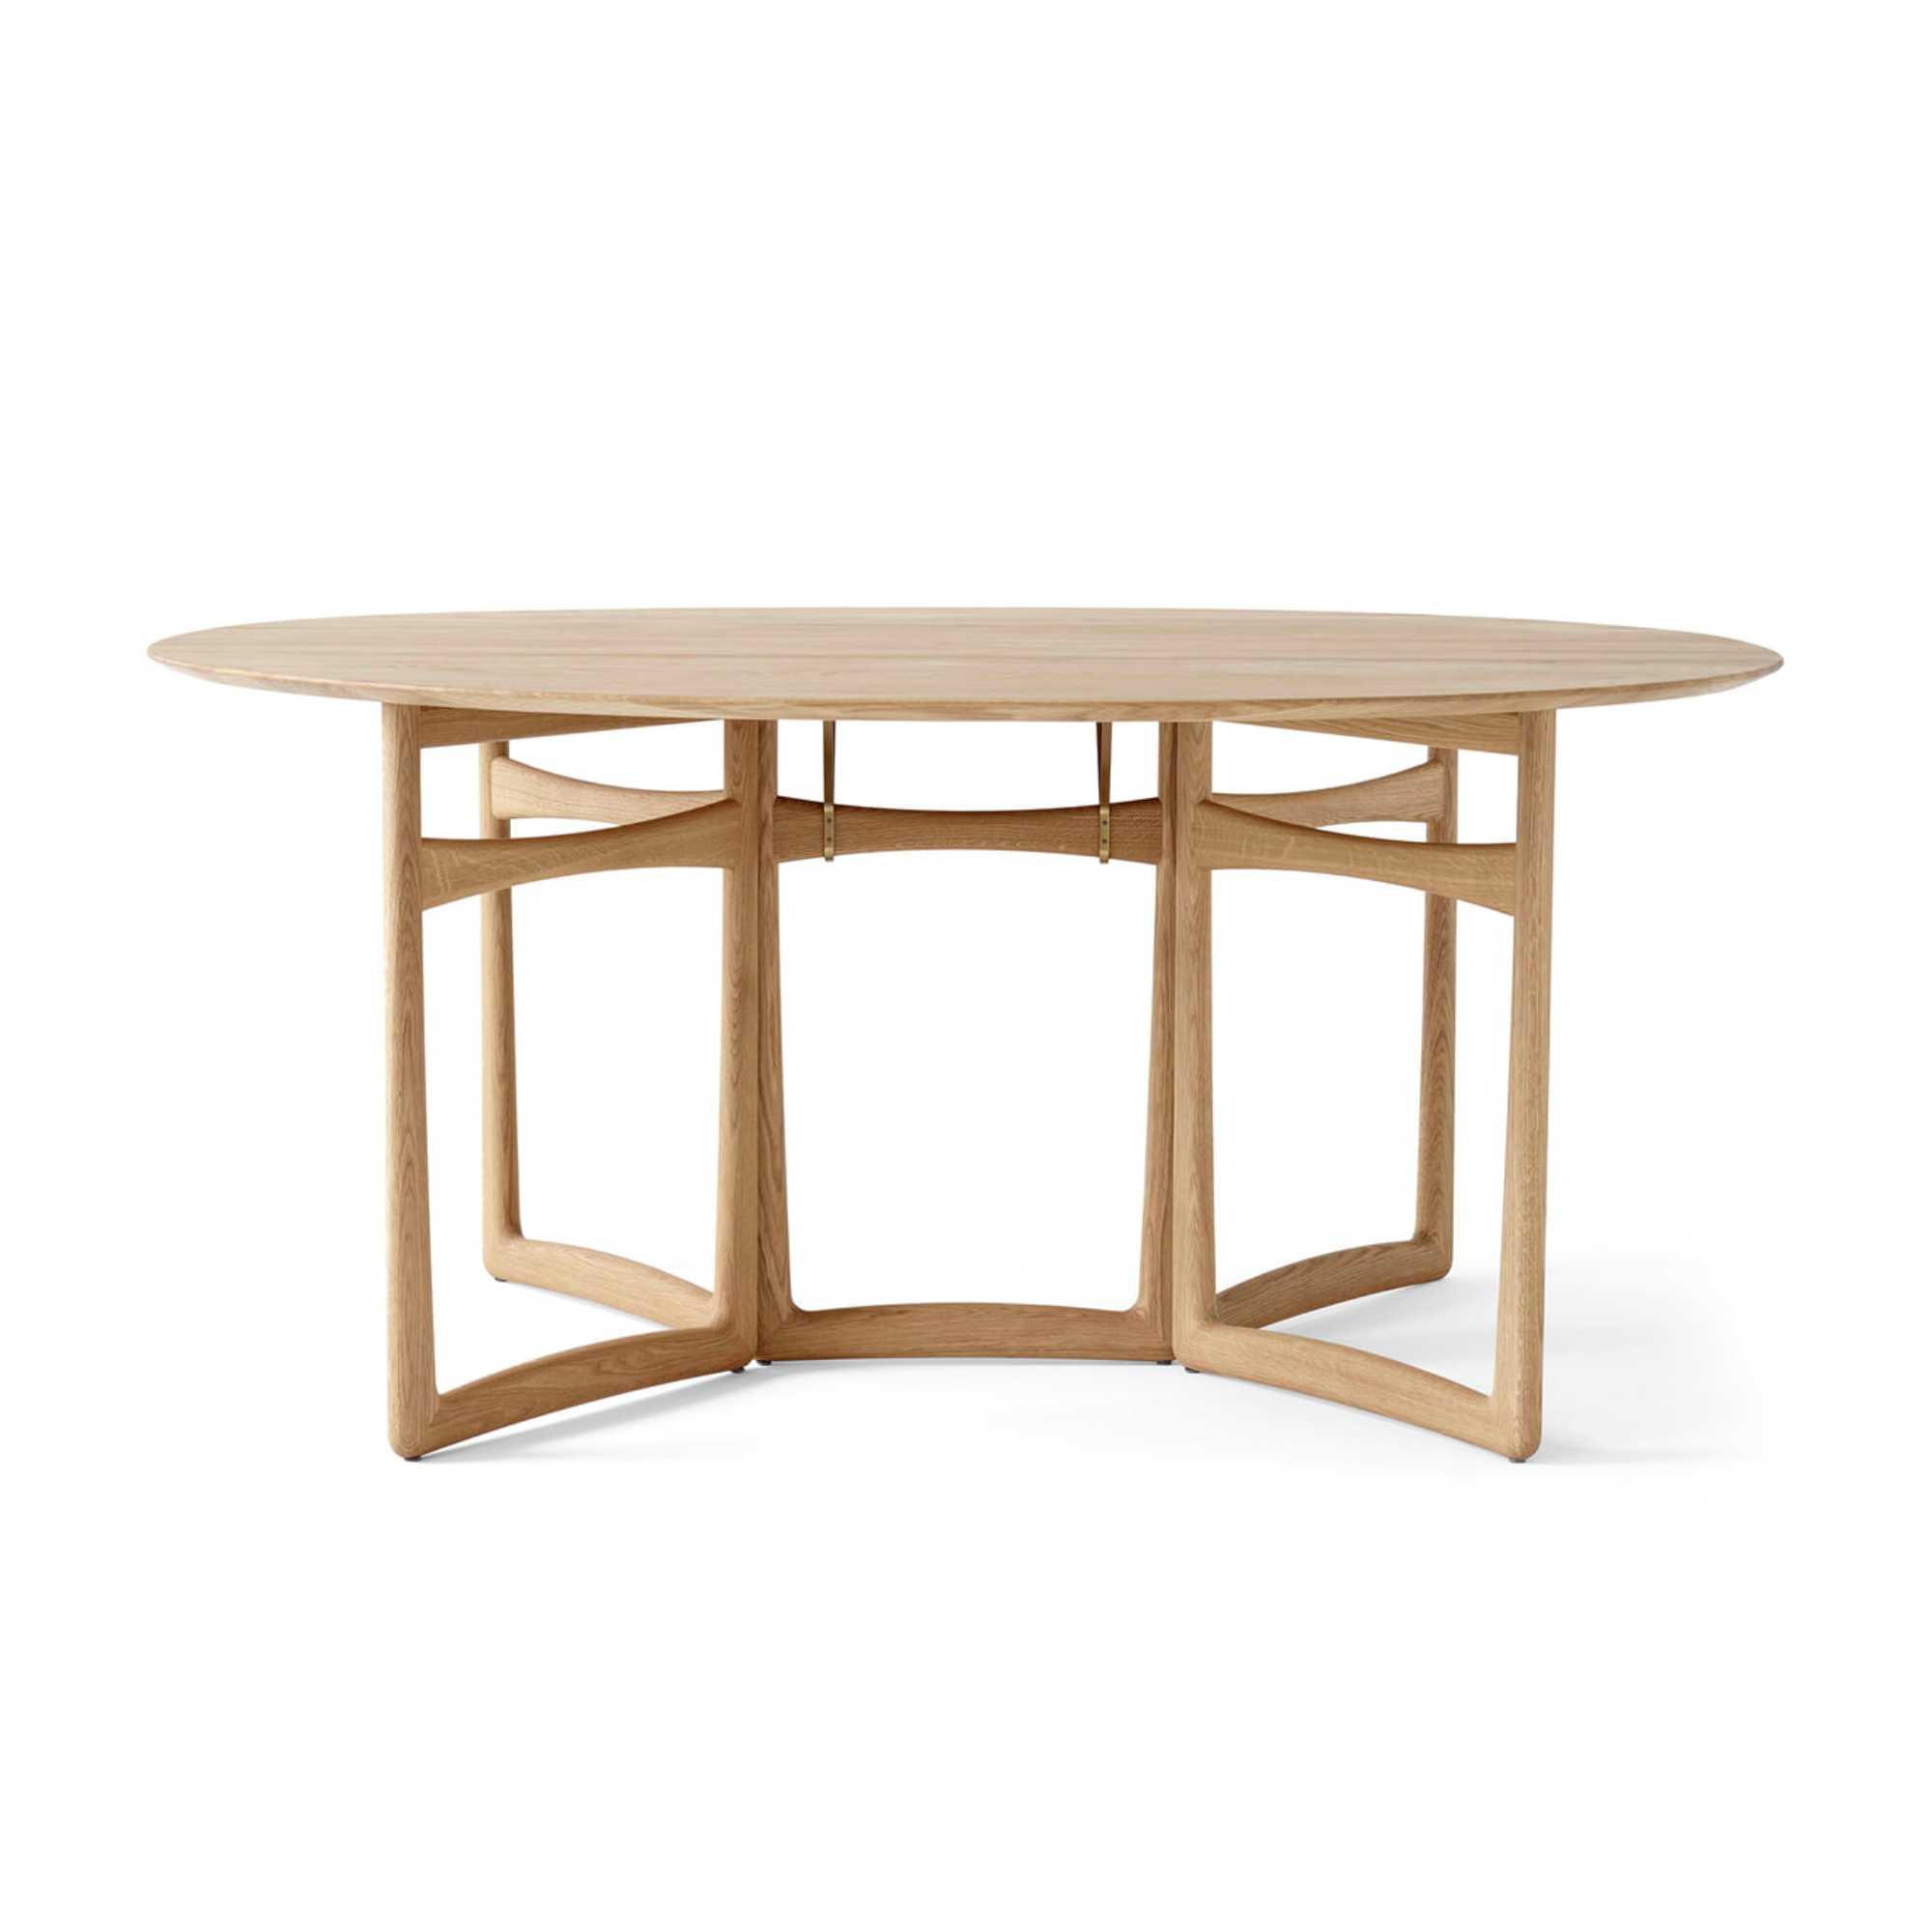 &Tradition HM6 Drop Leaf Dinning Table , White Oiled Oak